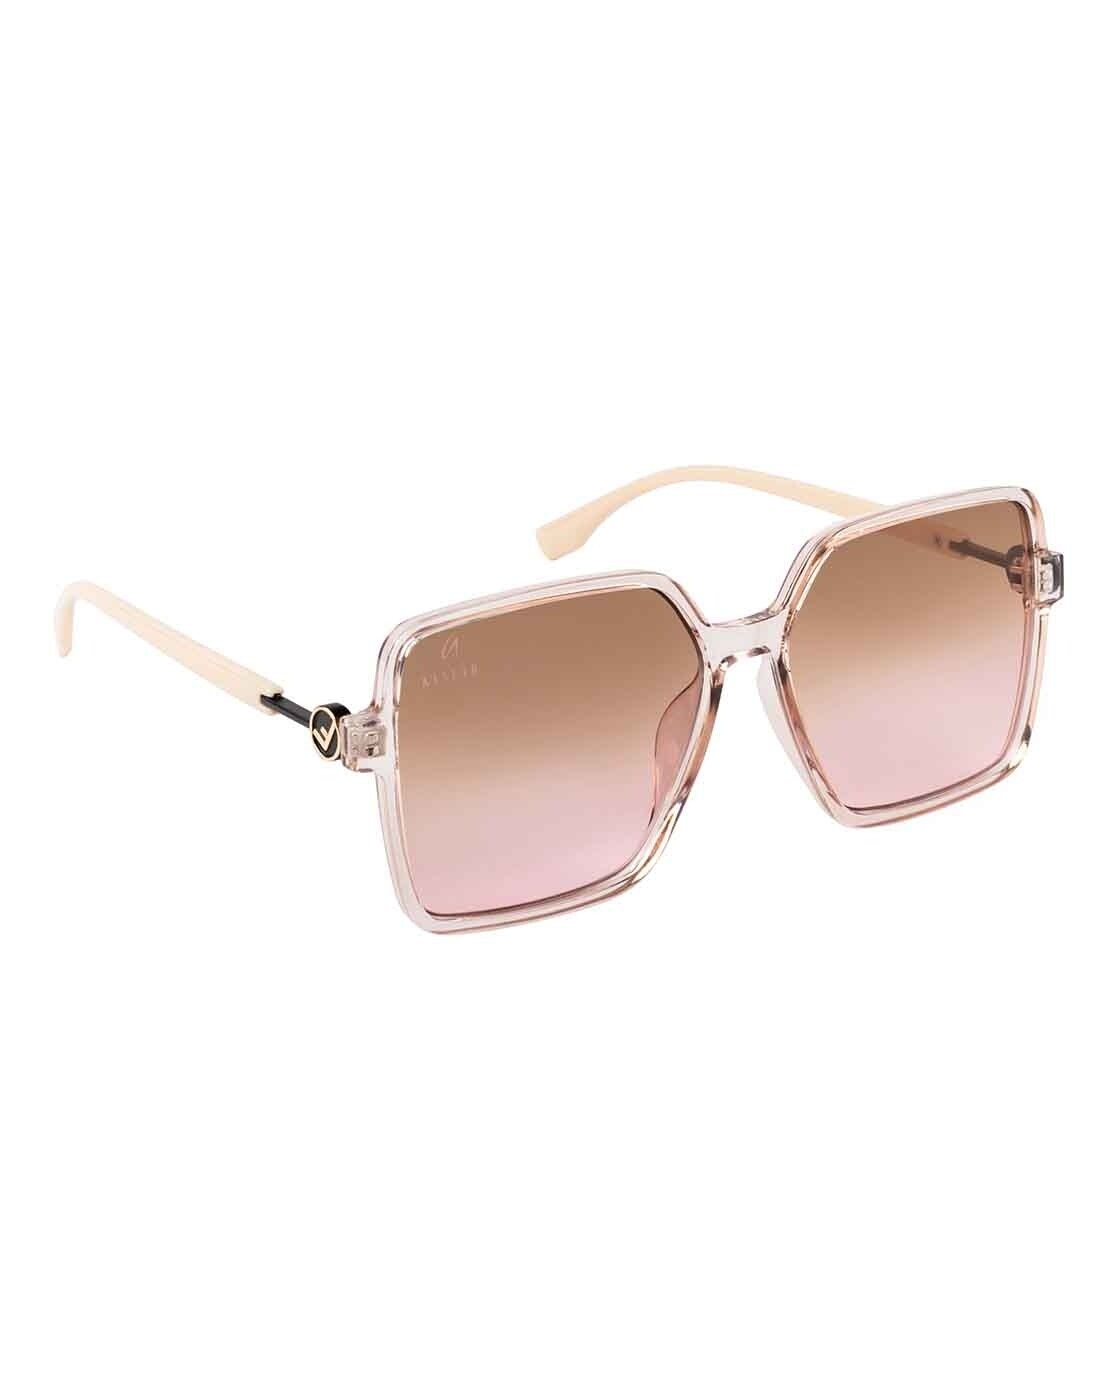 Le Specs Sweet Fantasy Sunglasses - Crystal Clear Tort | SurfStitch